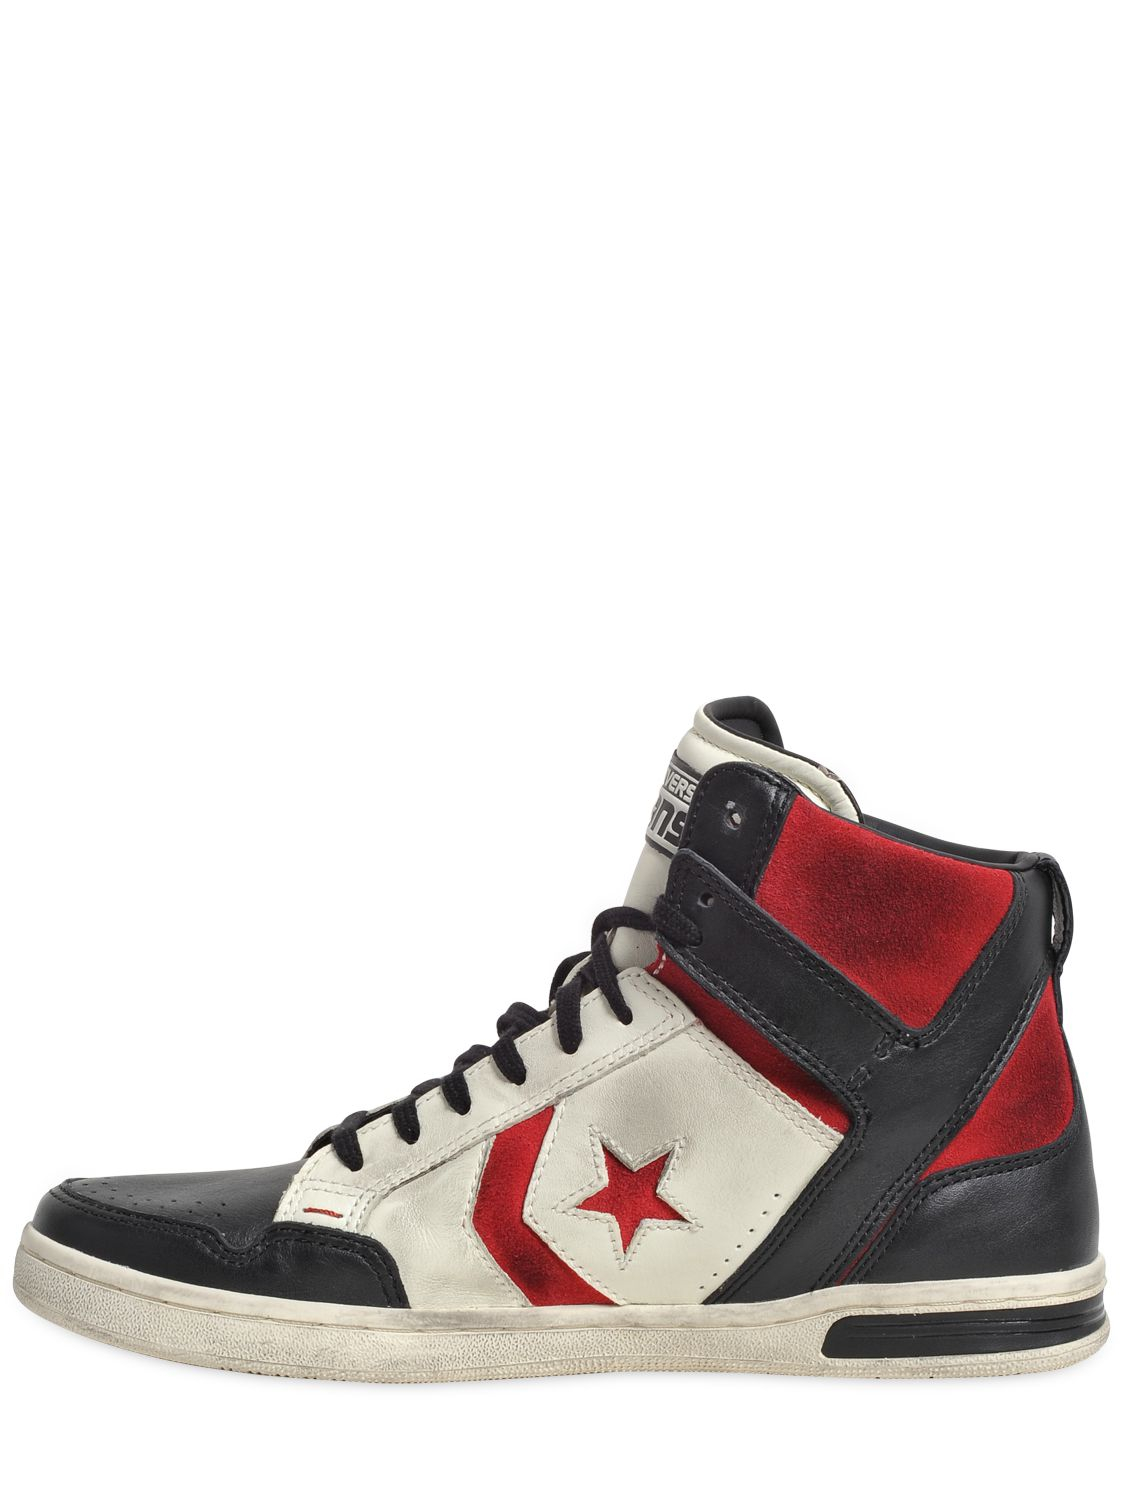 Converse Weapon Leather High Top Sneakers in White for Men | Lyst ايرمان